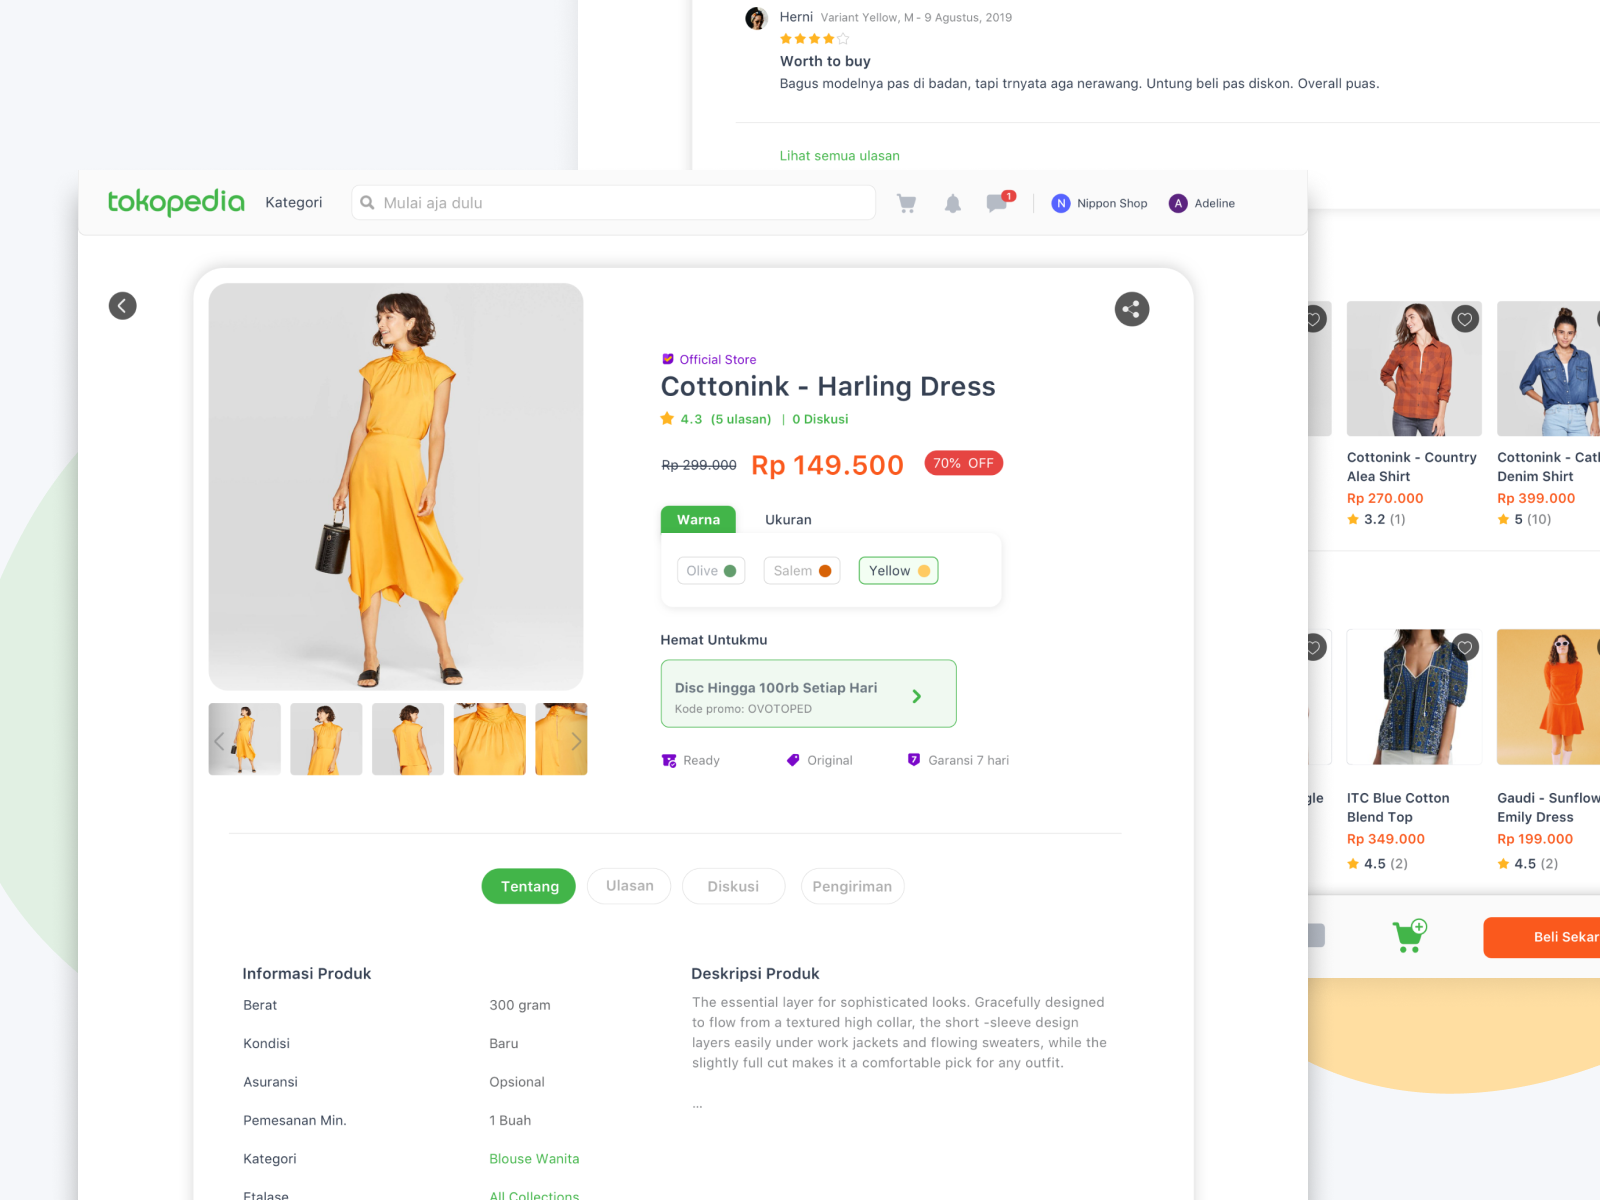 product-detail-page-for-ecommerce-website-by-adeline-atmadja-on-dribbble